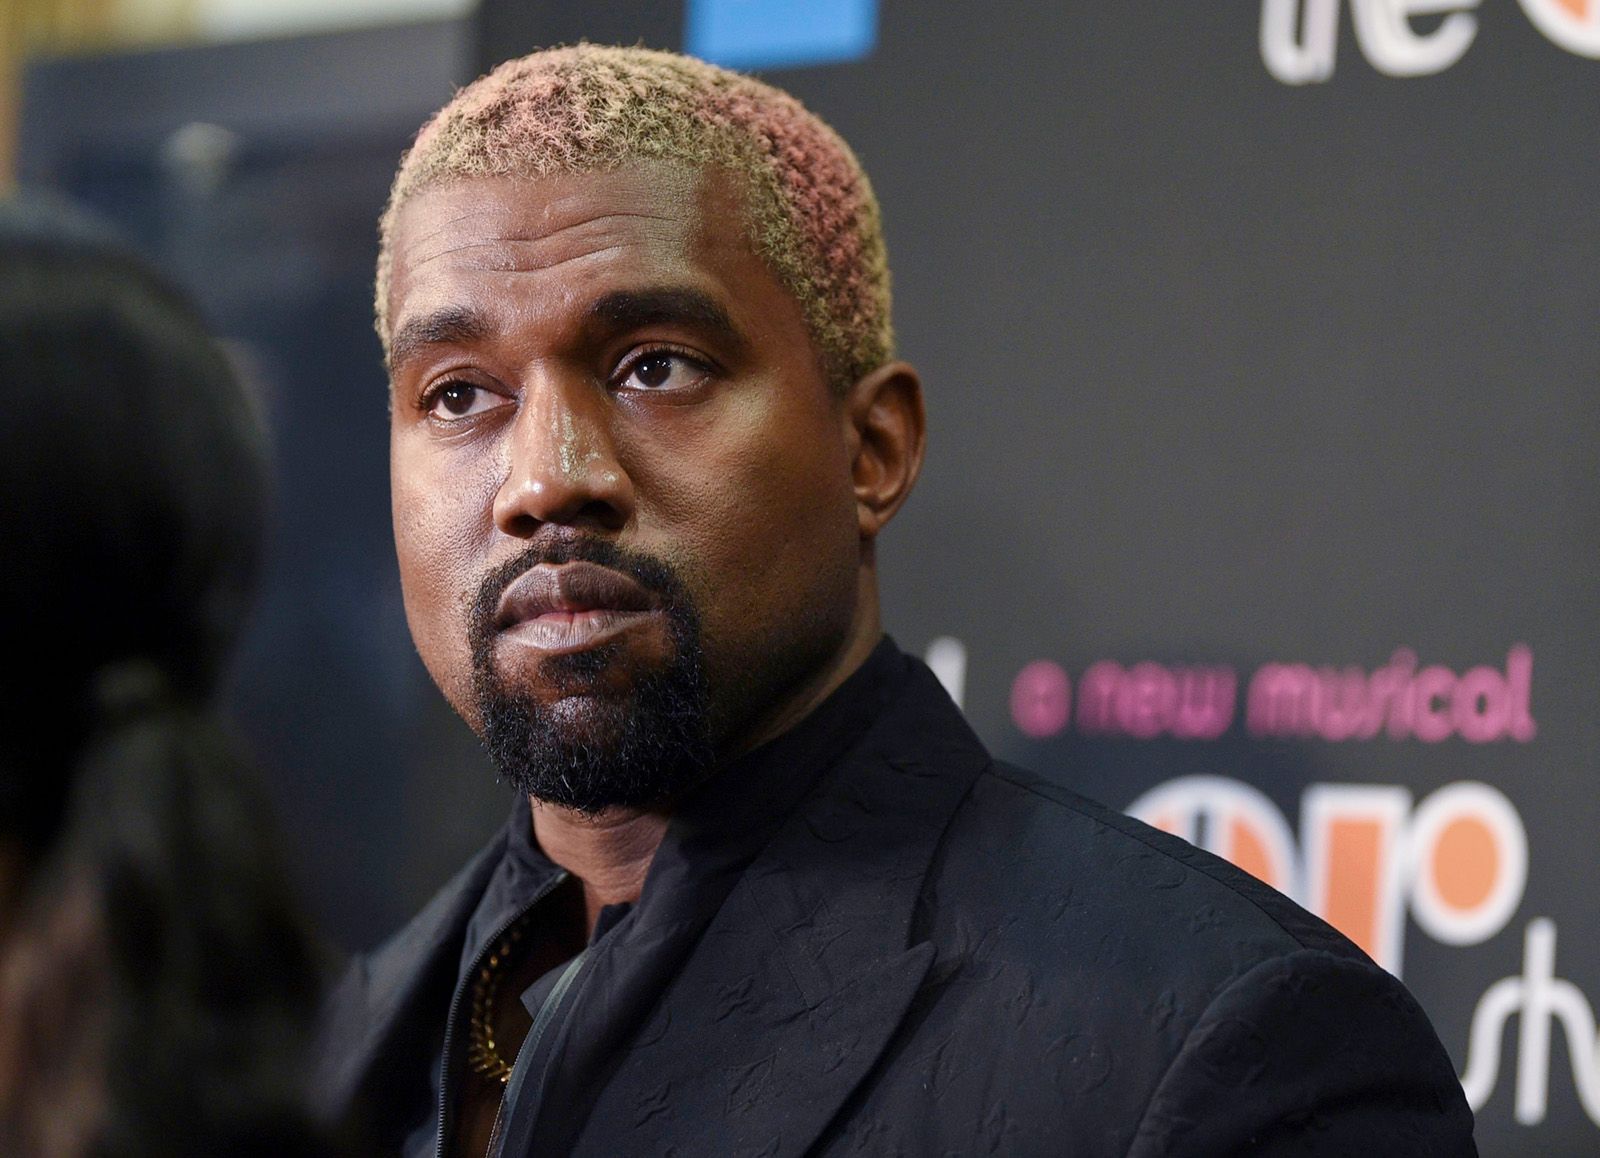 Kanye West's Team Reports Theft of £1 Million Worth of Yeezy Gap Clothing from L.A. Warehouse